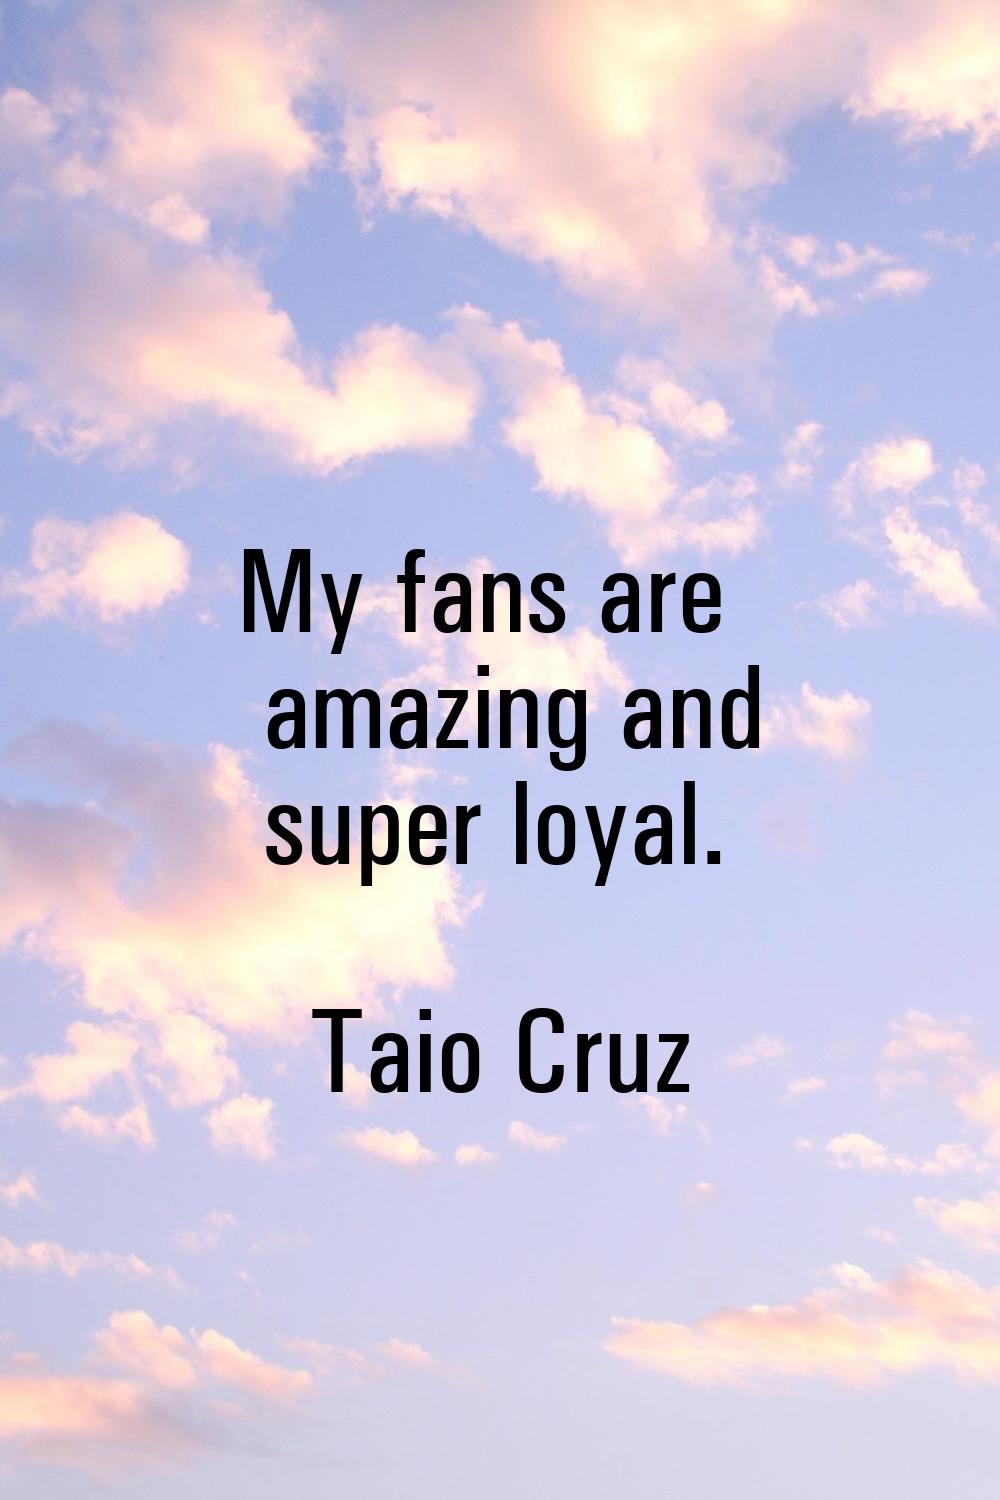 My fans are amazing and super loyal.